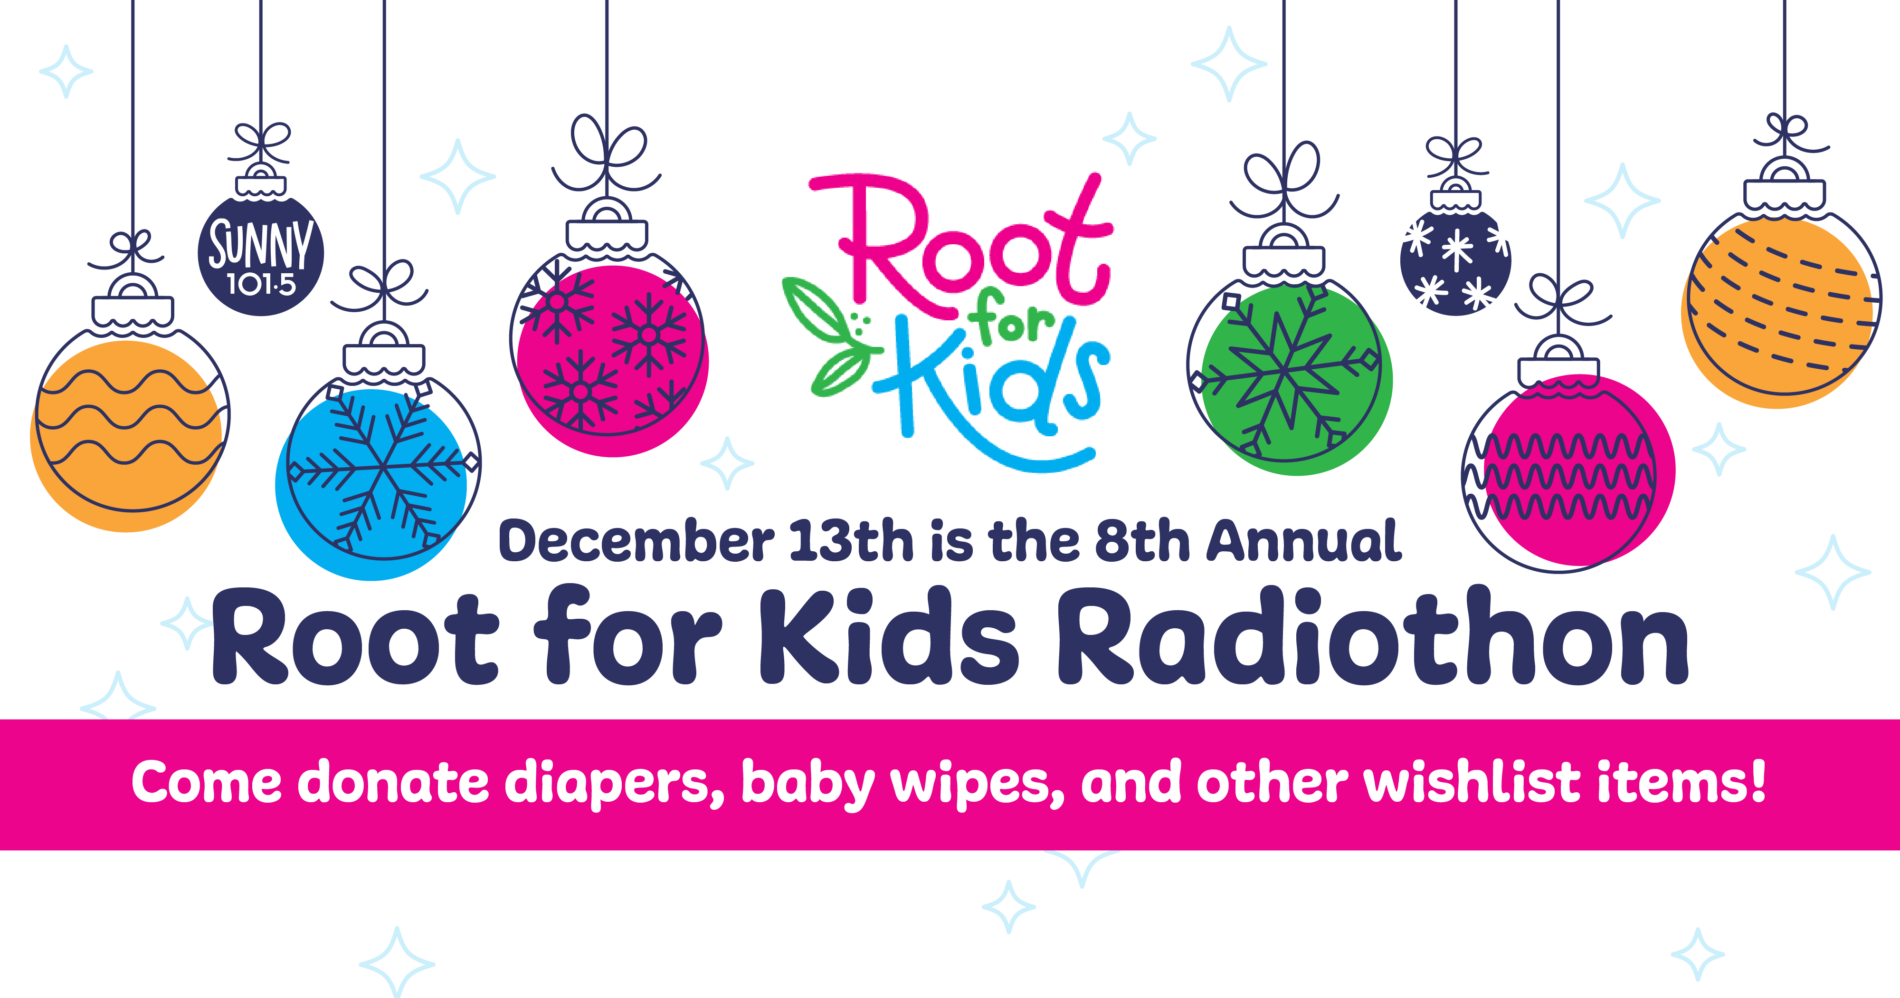 101.5 Sunny Root for Kids Radiothon